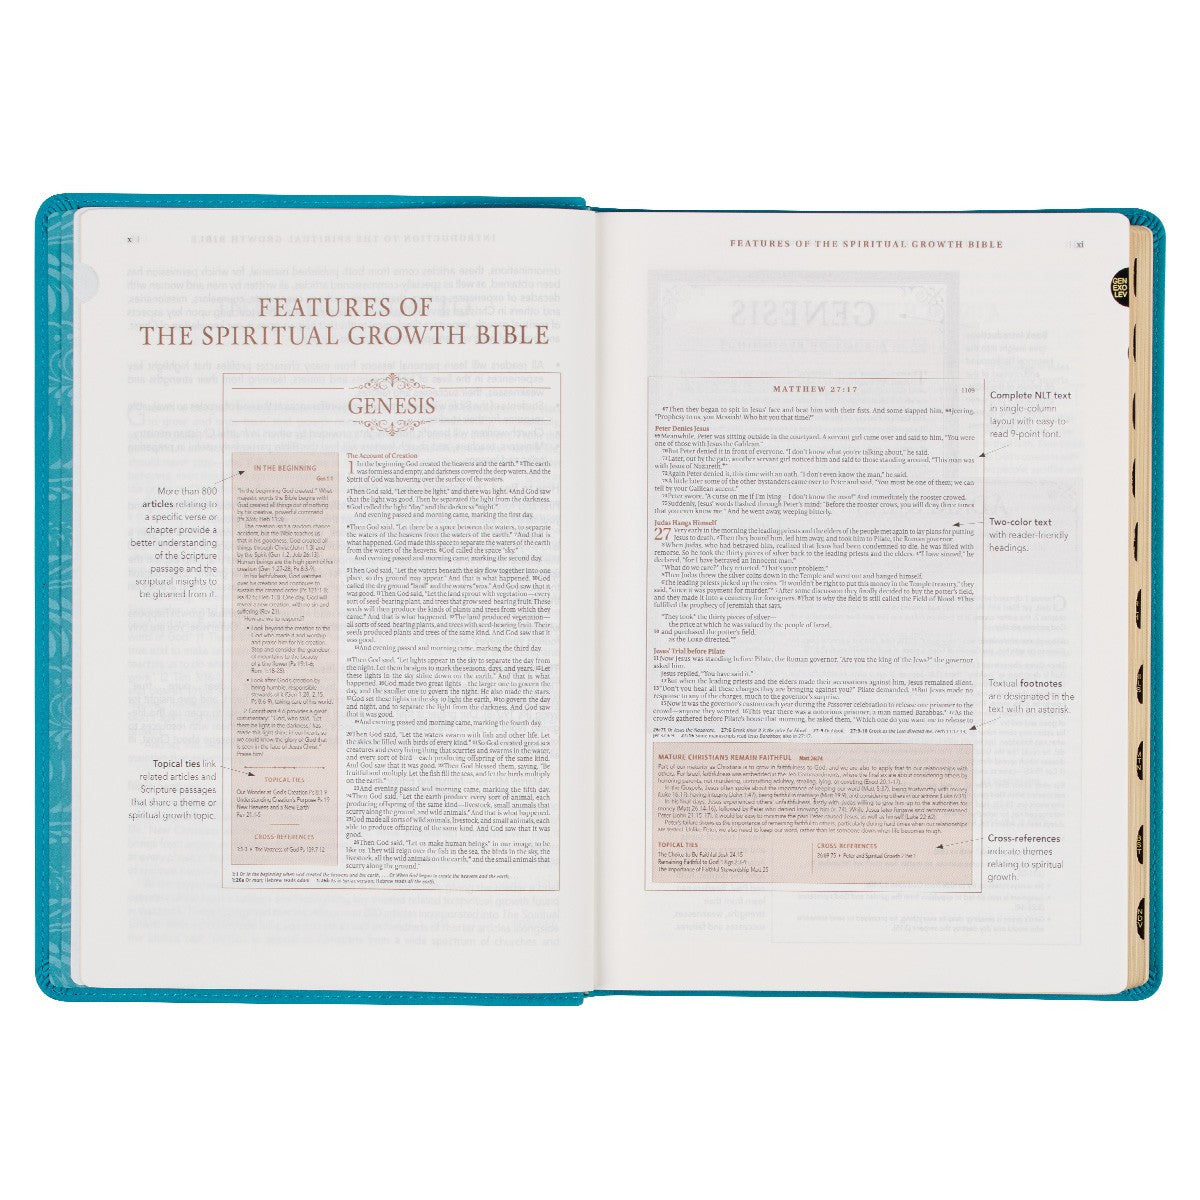 Teal Faux Leather Spiritual Growth Bible - The Christian Gift Company